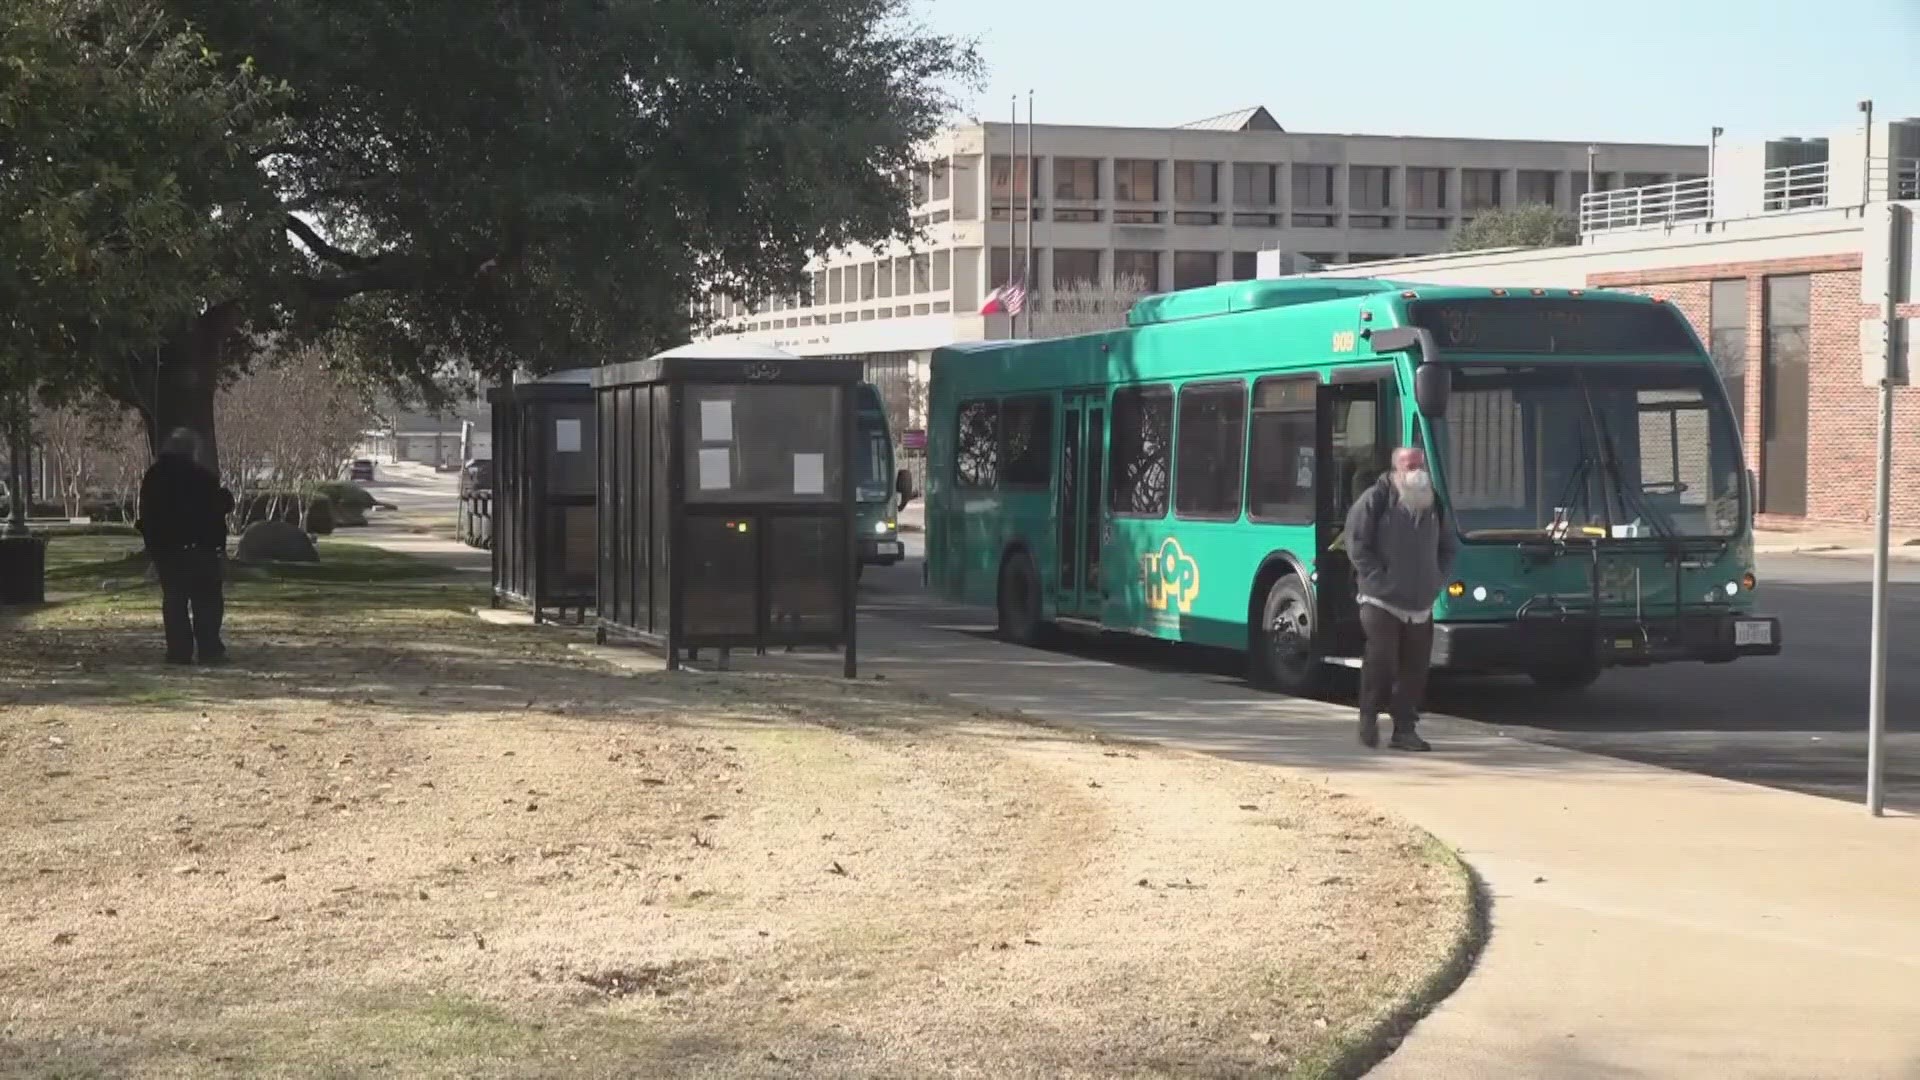 Two Central Texas residents rely on Hop Transportation to get to the grocery store or a doctor's appointment. A 2021 policy change has some riders concerned.